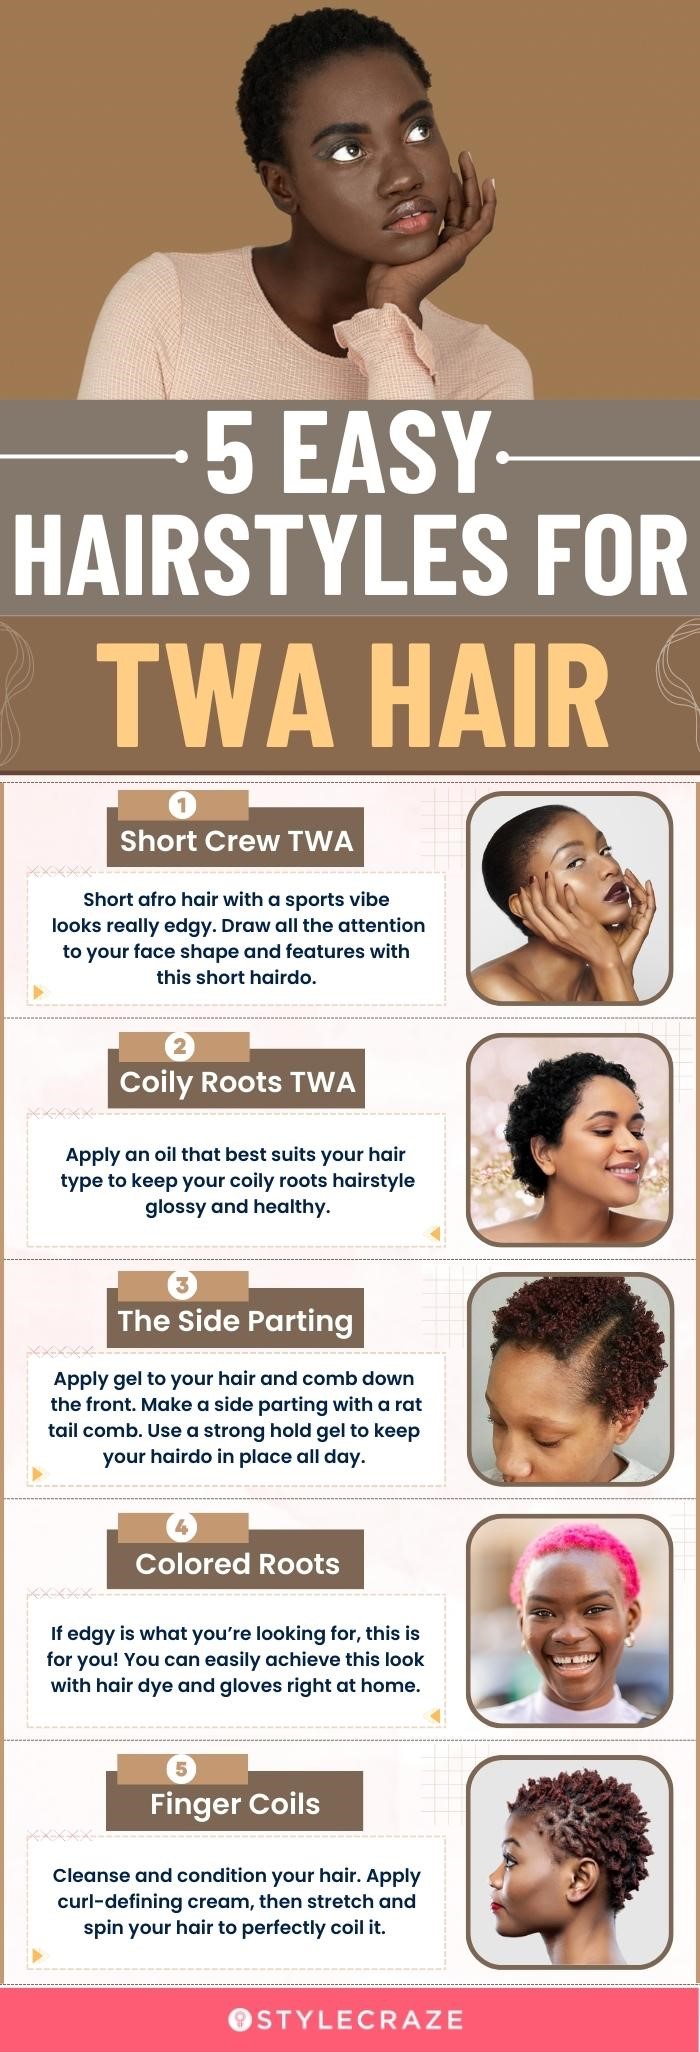 5 easy hairstyles for twa hairs (infographic)